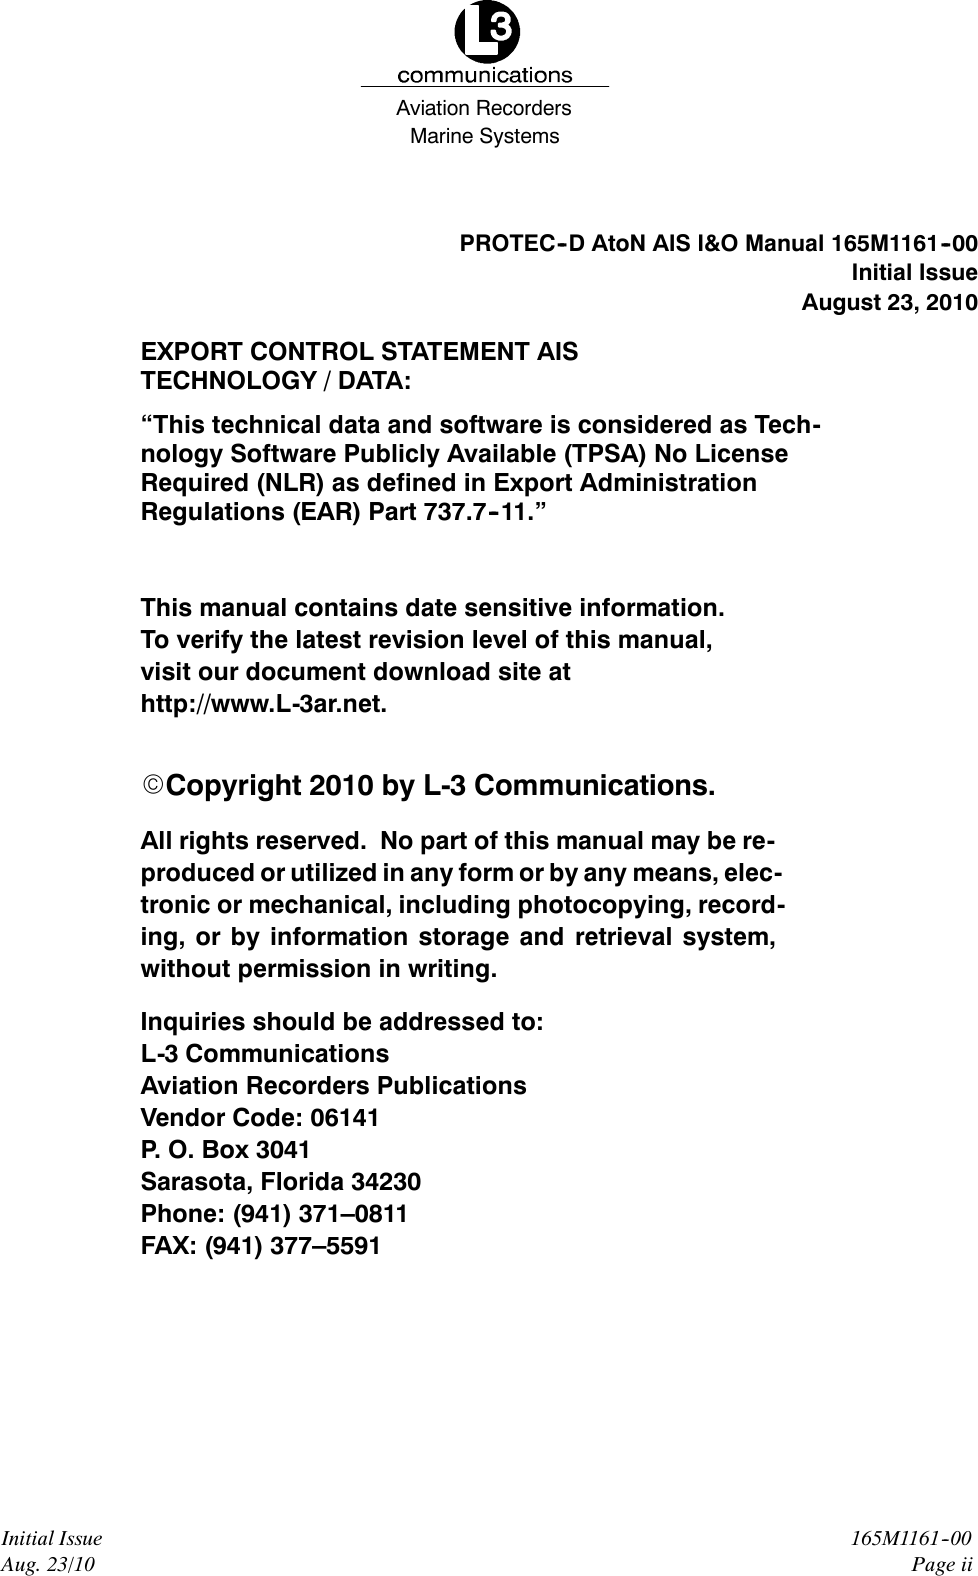 Marine SystemsAviation RecordersInitial IssueAug. 23/10165M1161--00Page iiPROTEC--D AtoN AIS I&amp;O Manual 165M1161--00Initial IssueAugust 23, 2010EXPORT CONTROL STATEMENT AISTECHNOLOGY / DATA:“This technical data and software is considered as Tech-nology Software Publicly Available (TPSA) No LicenseRequired (NLR) as defined in Export AdministrationRegulations (EAR) Part 737.7--11.”This manual contains date sensitive information.To verify the latest revision level of this manual,visit our document download site athttp://www.L-3ar.net.ECopyright 2010 by L-3 Communications.All rights reserved. No part of this manual may be re-produced or utilized in any form or by any means, elec-tronic or mechanical, including photocopying, record-ing, or by information storage and retrieval system,without permission in writing.Inquiries should be addressed to:L-3 CommunicationsAviation Recorders PublicationsVendor Code: 06141P. O. Box 3041Sarasota, Florida 34230Phone: (941) 371–0811FAX: (941) 377–5591